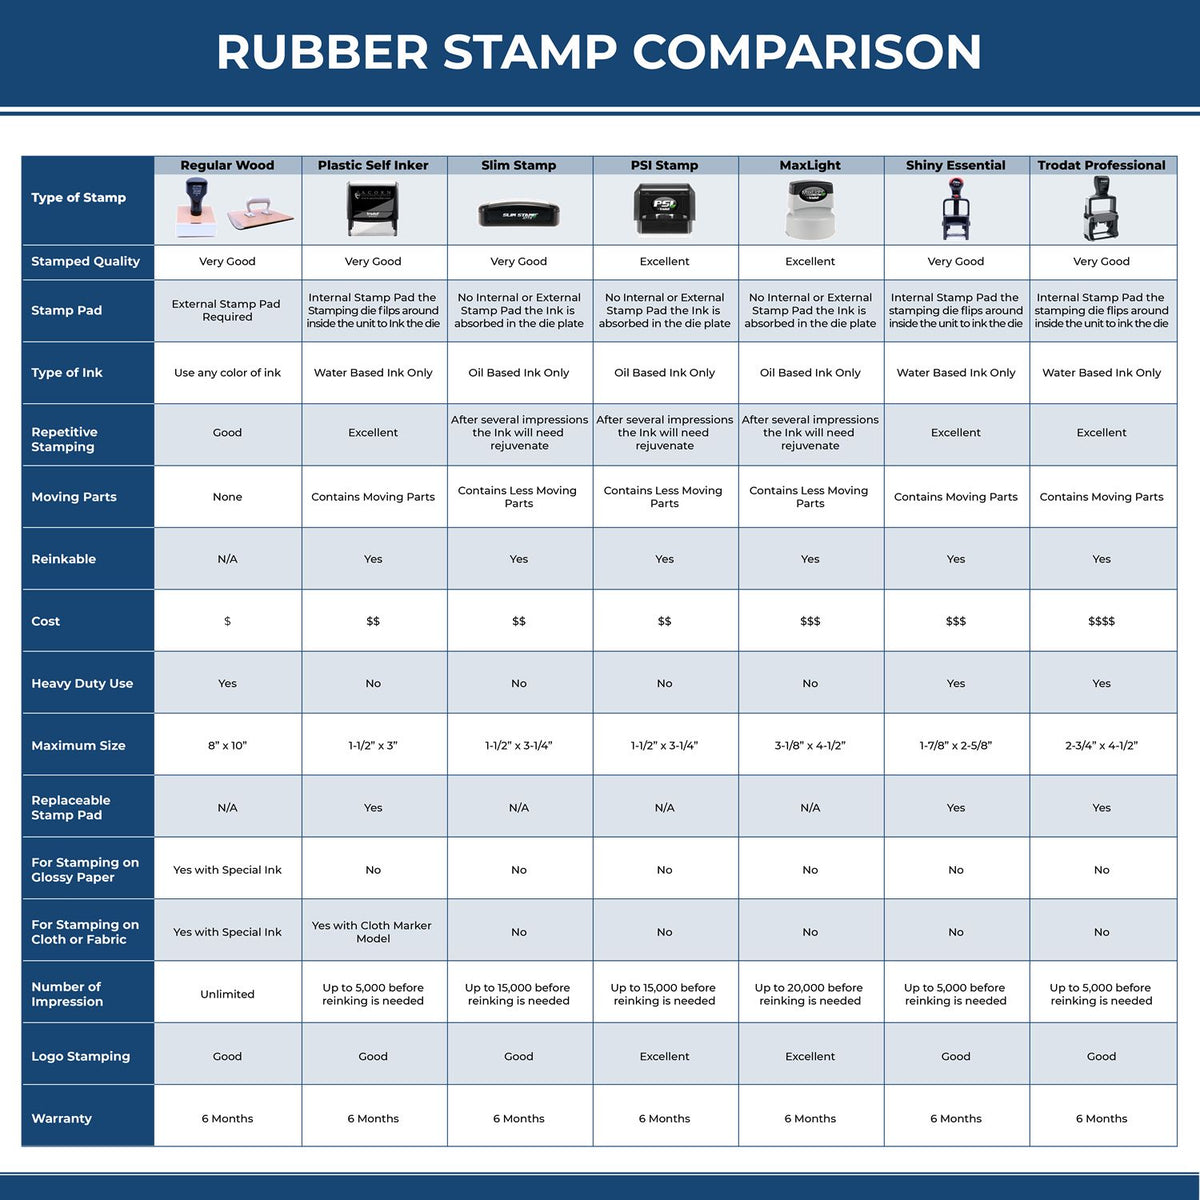 Large Pre-Inked Your Work is Out of this world Stamp 5623SLIM Rubber Stamp Comparison